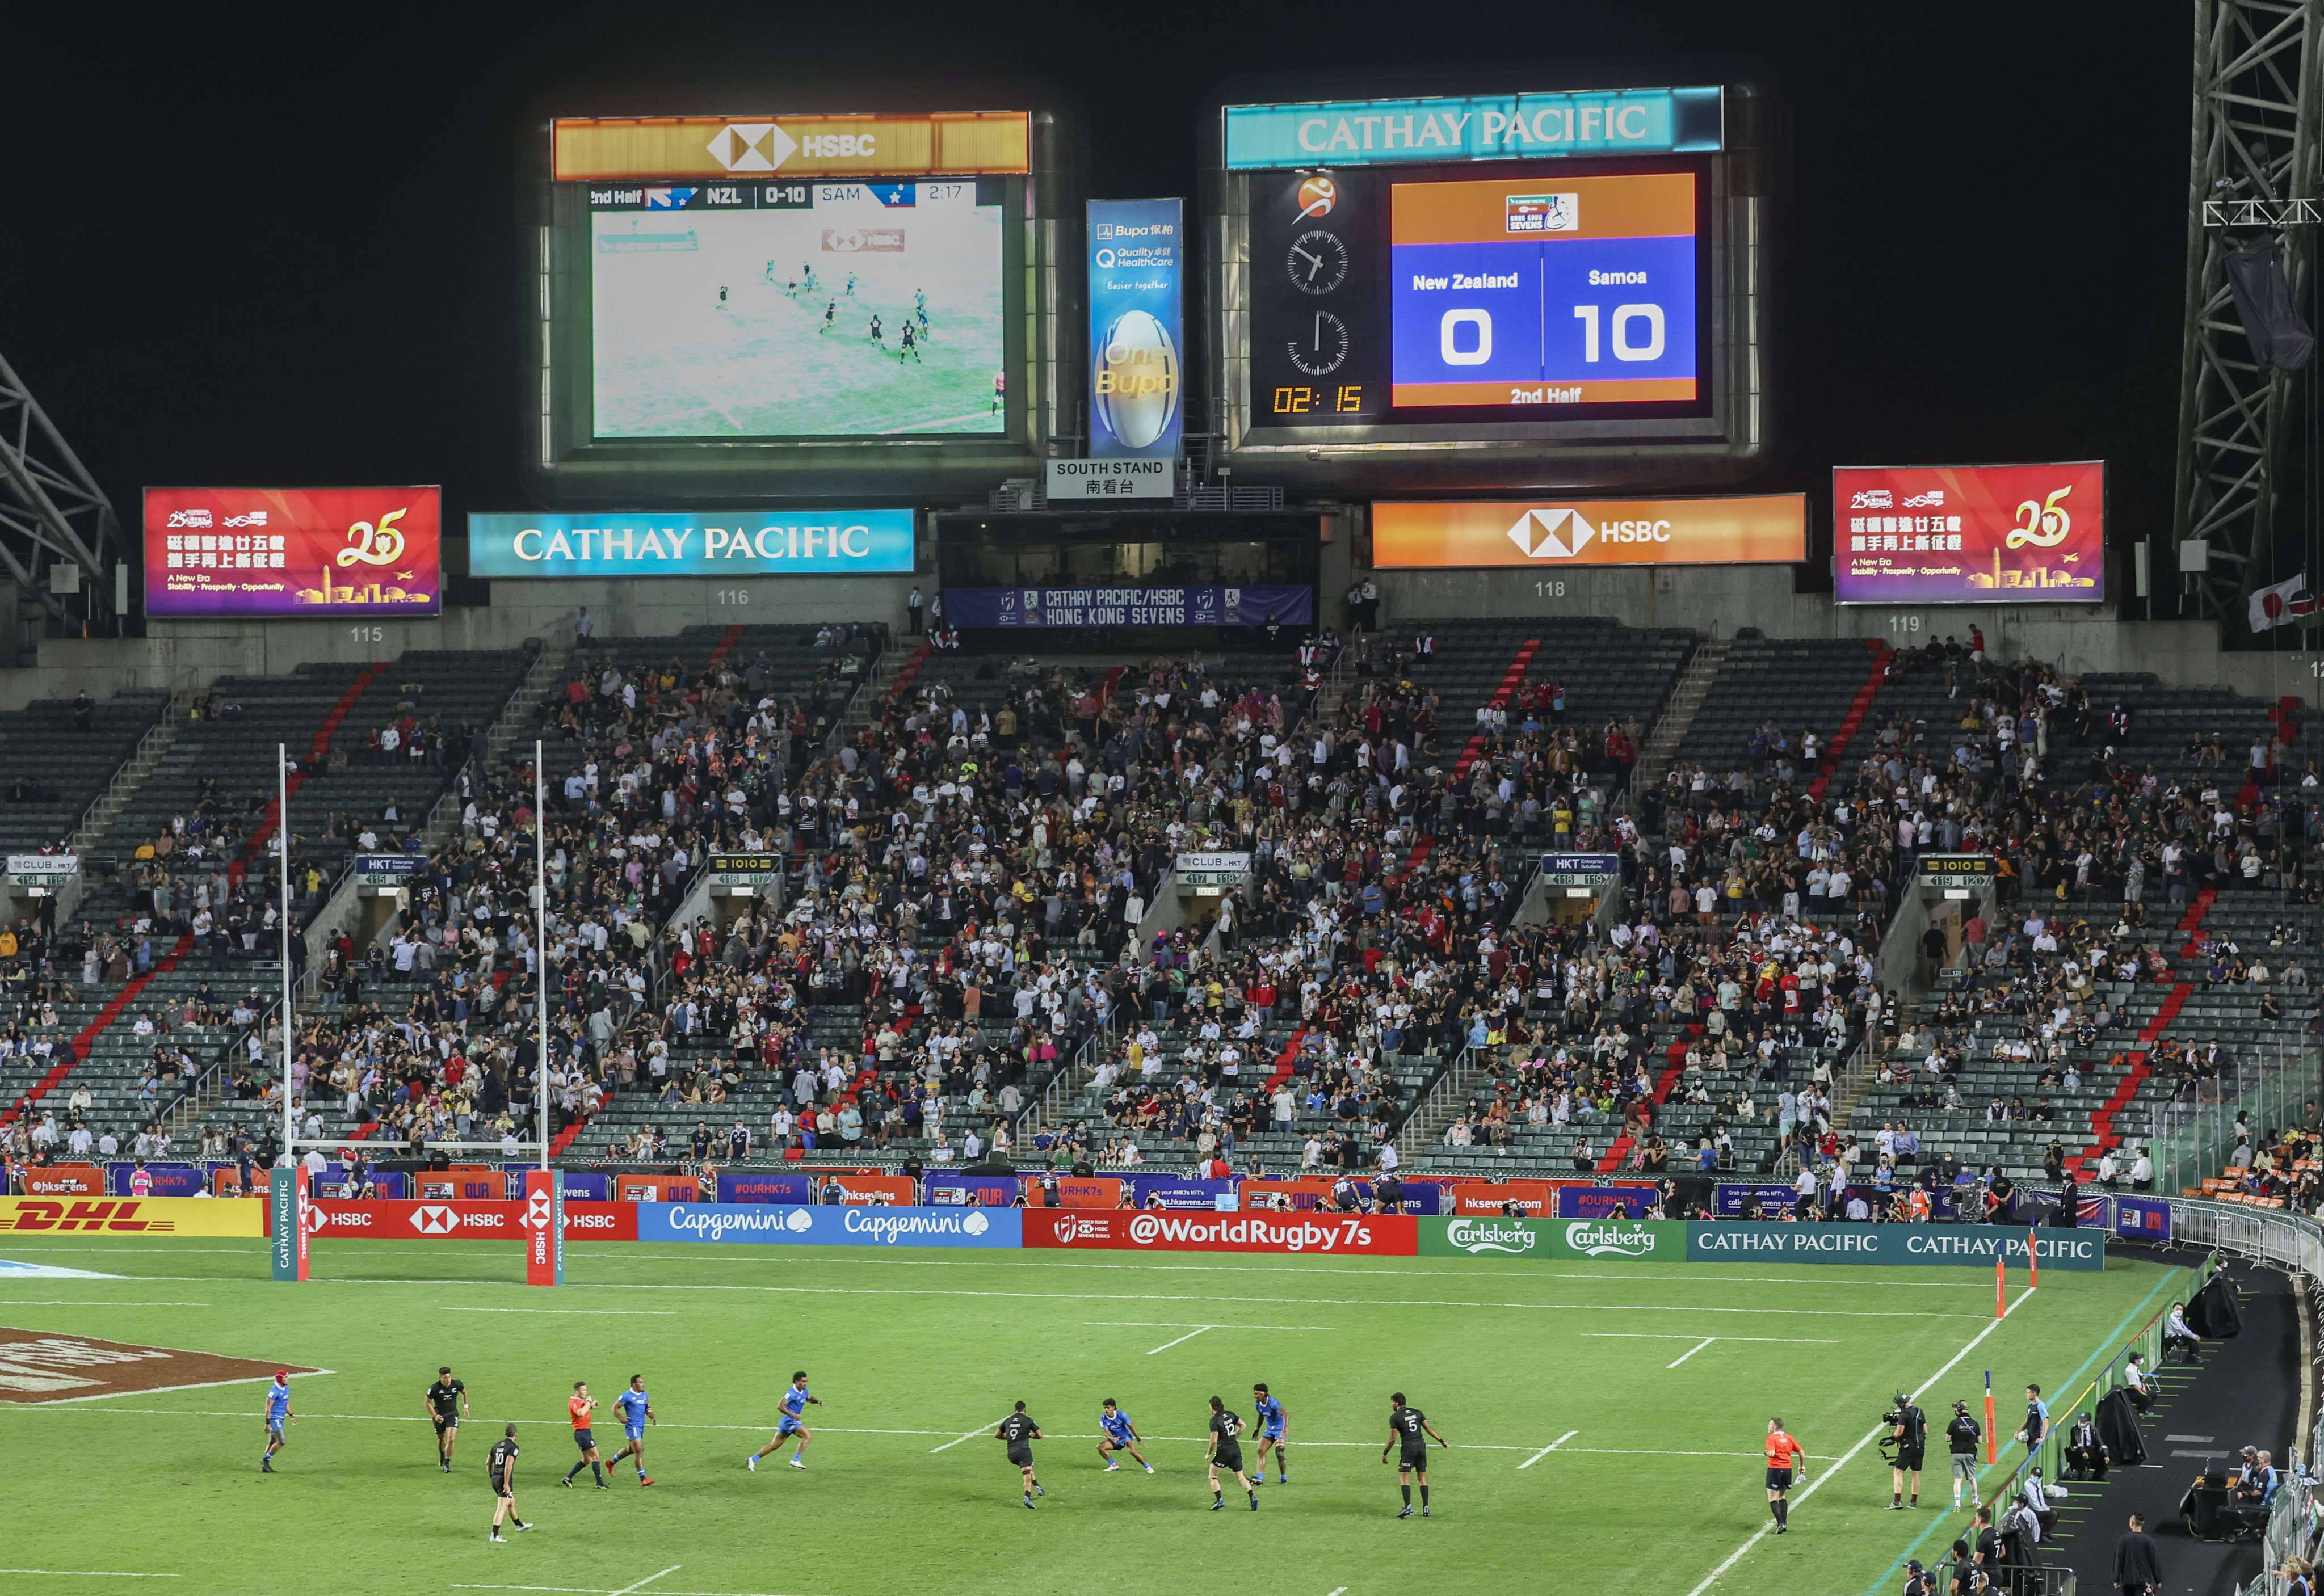 New Zealand take on Samoa during the first day of the Cathay Pacific/HSBC Hong Kong Sevens. Photo: Yik Yeung-man